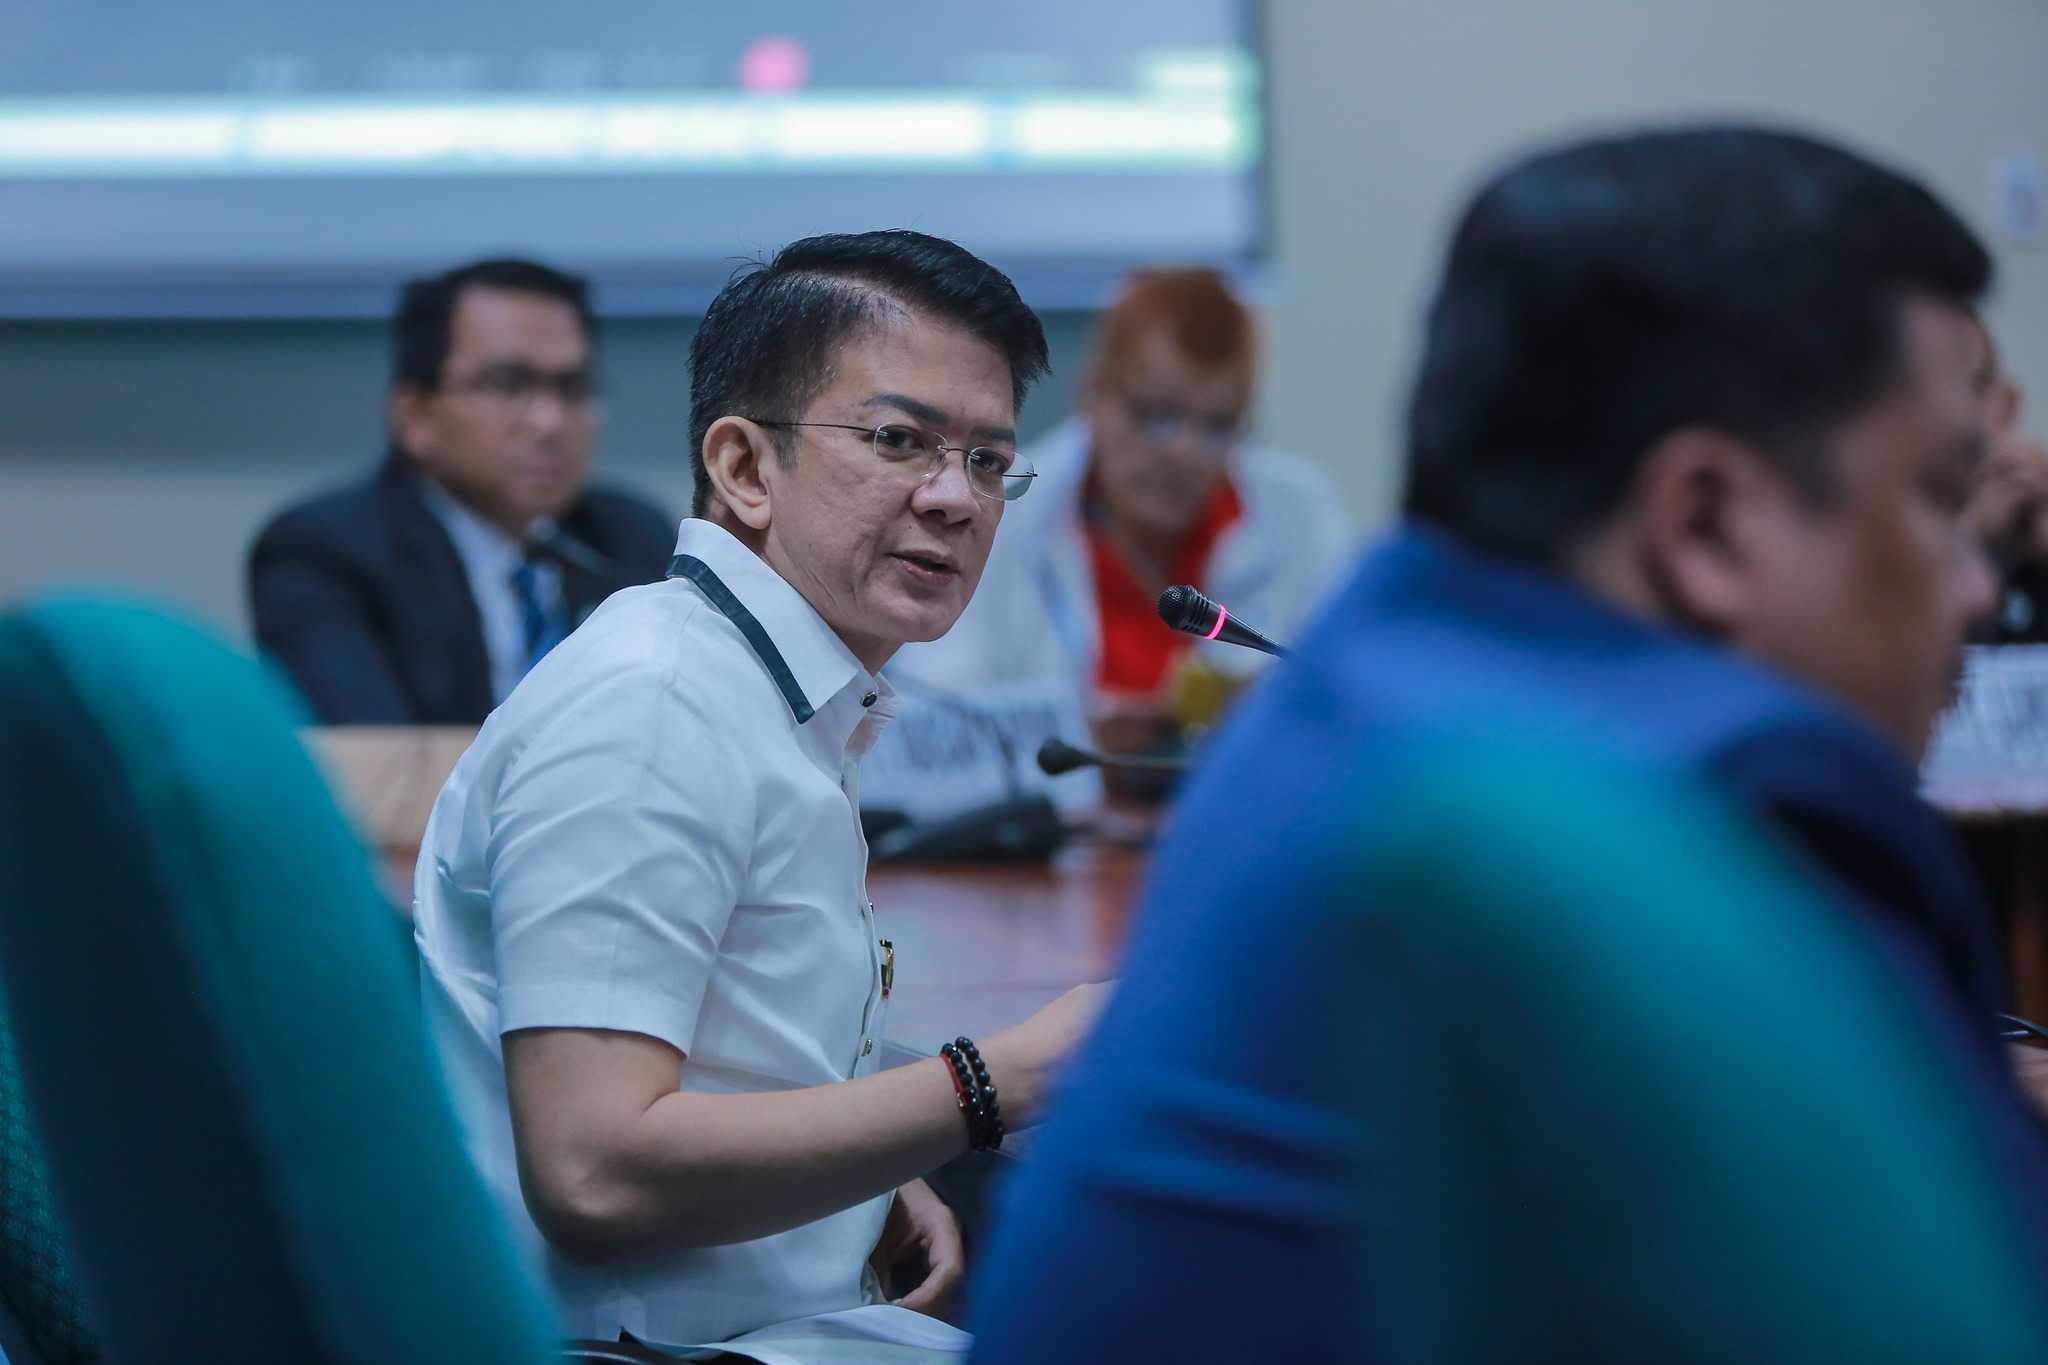 Escudero apologizes after vehicle with protocol plate got caught in EDSA busway